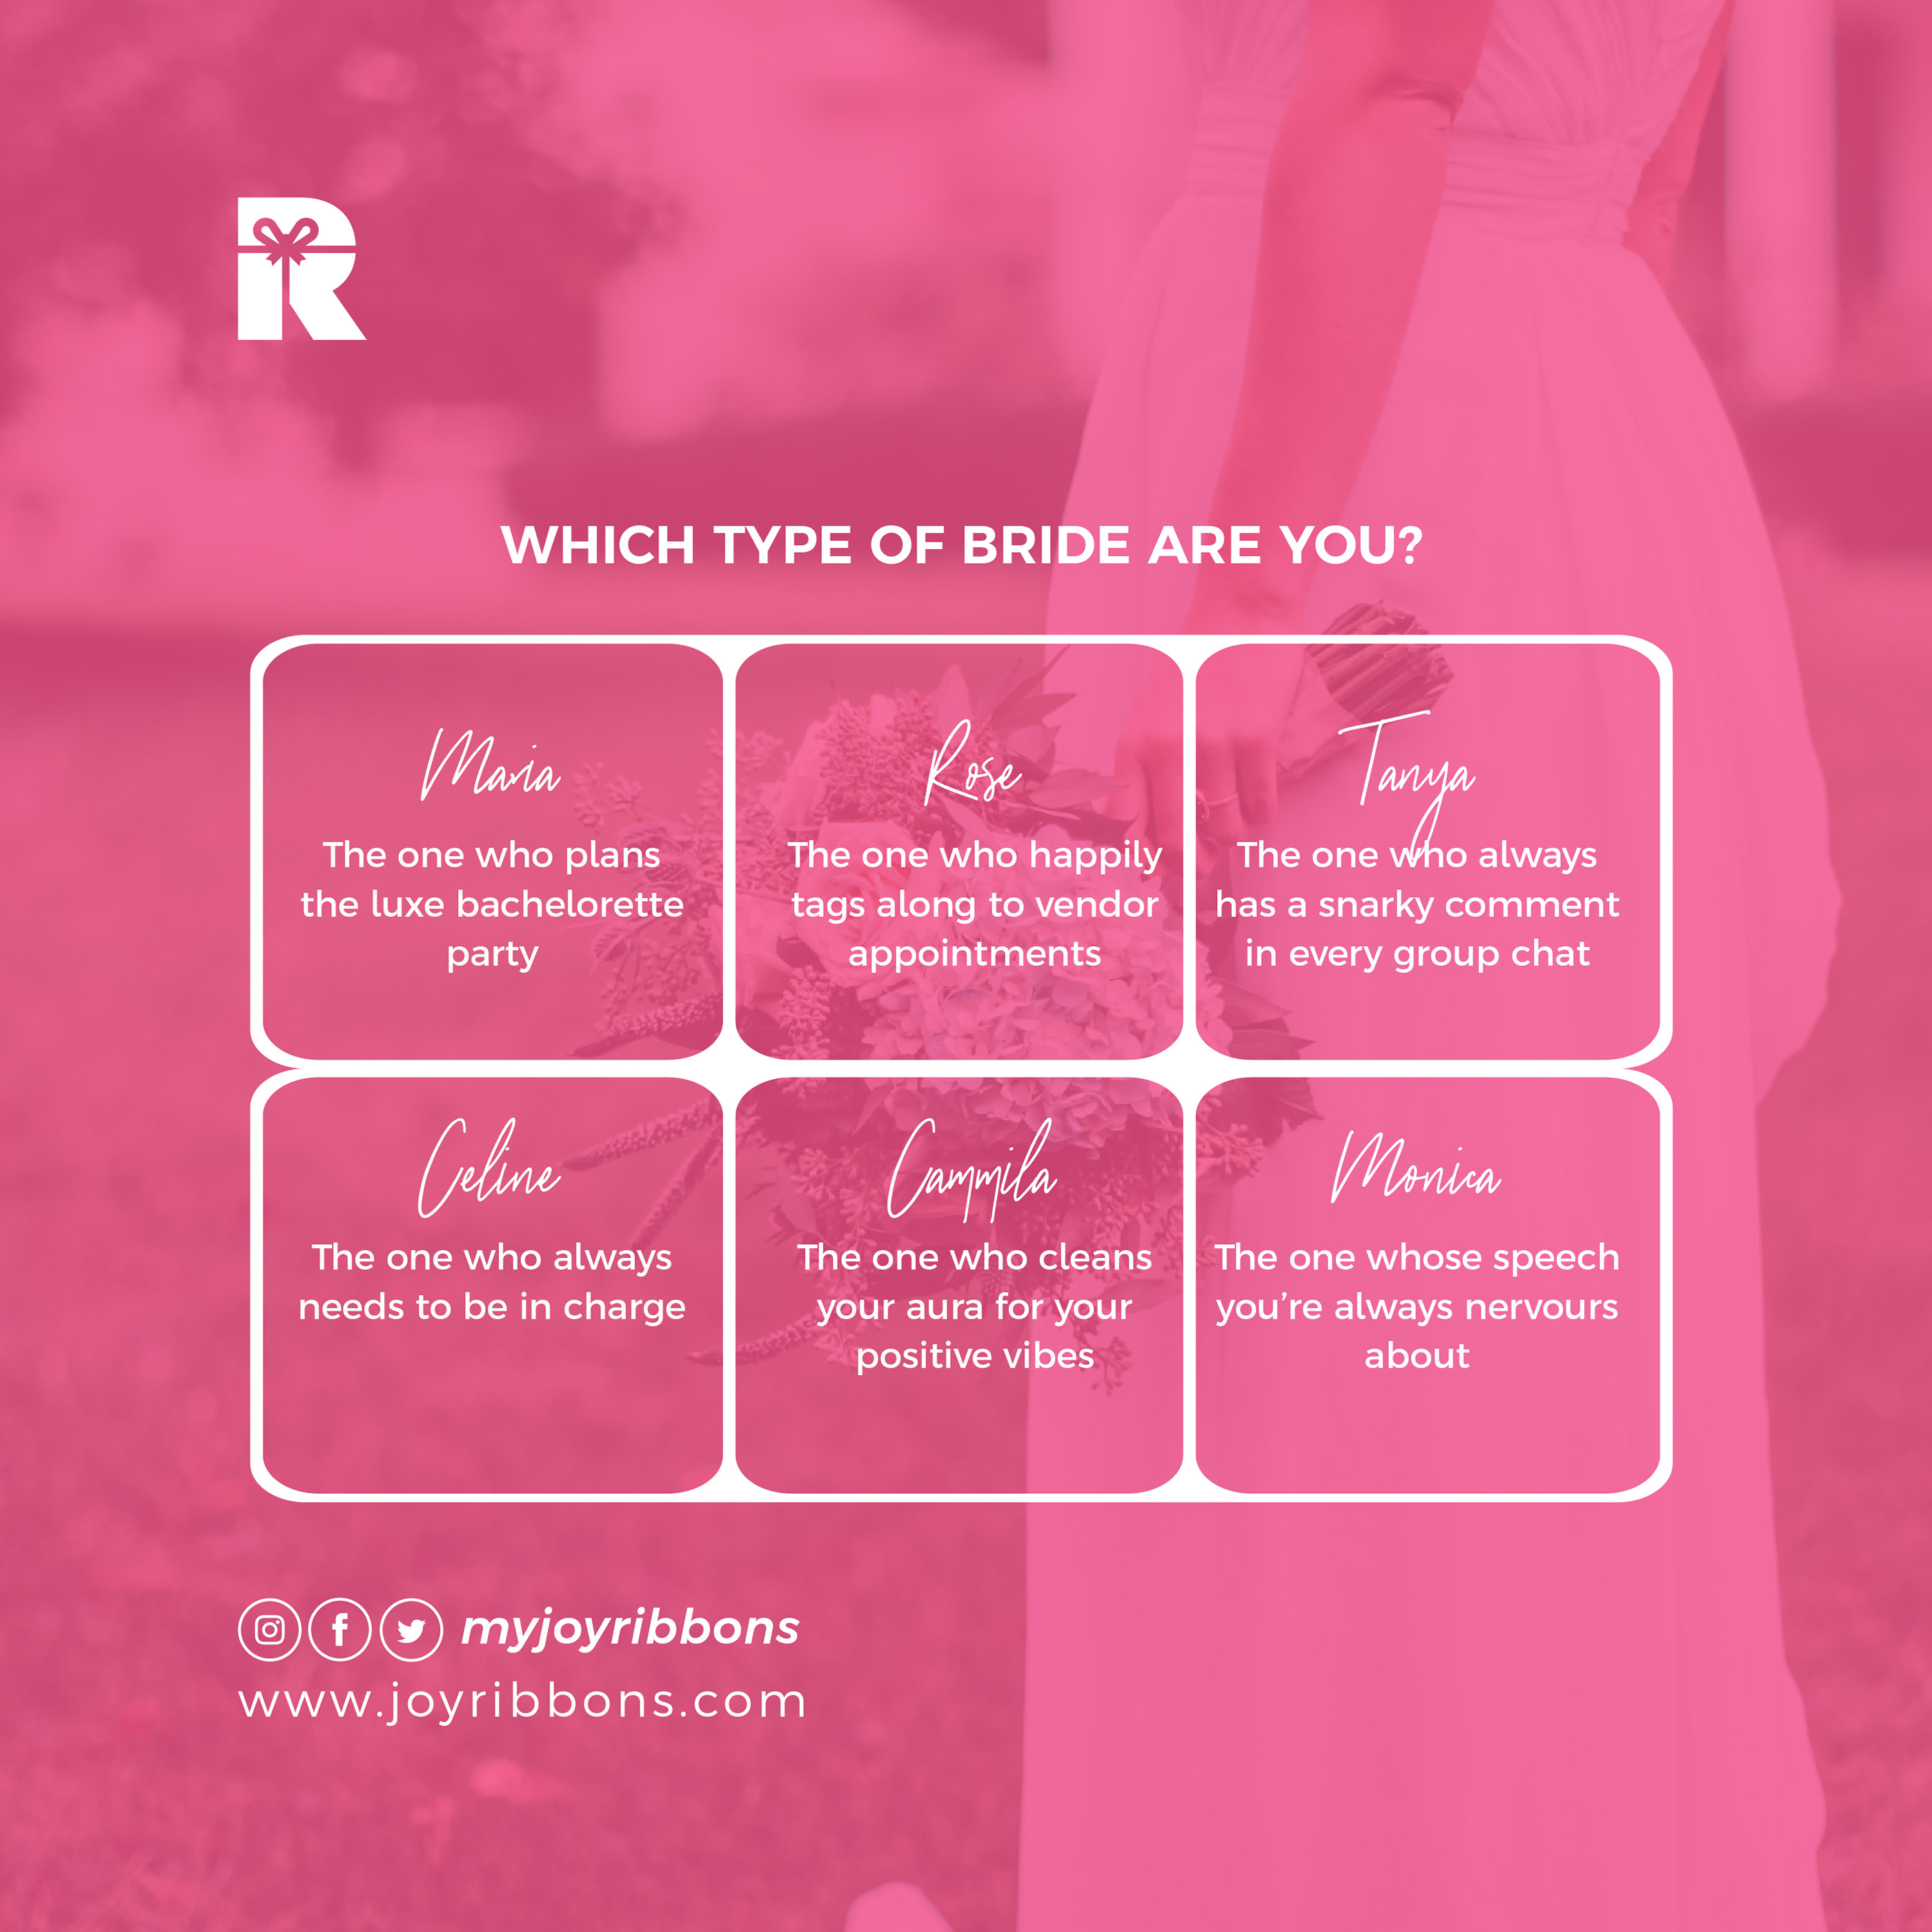 what type of bride are you? find out on JoyRibbons Blog